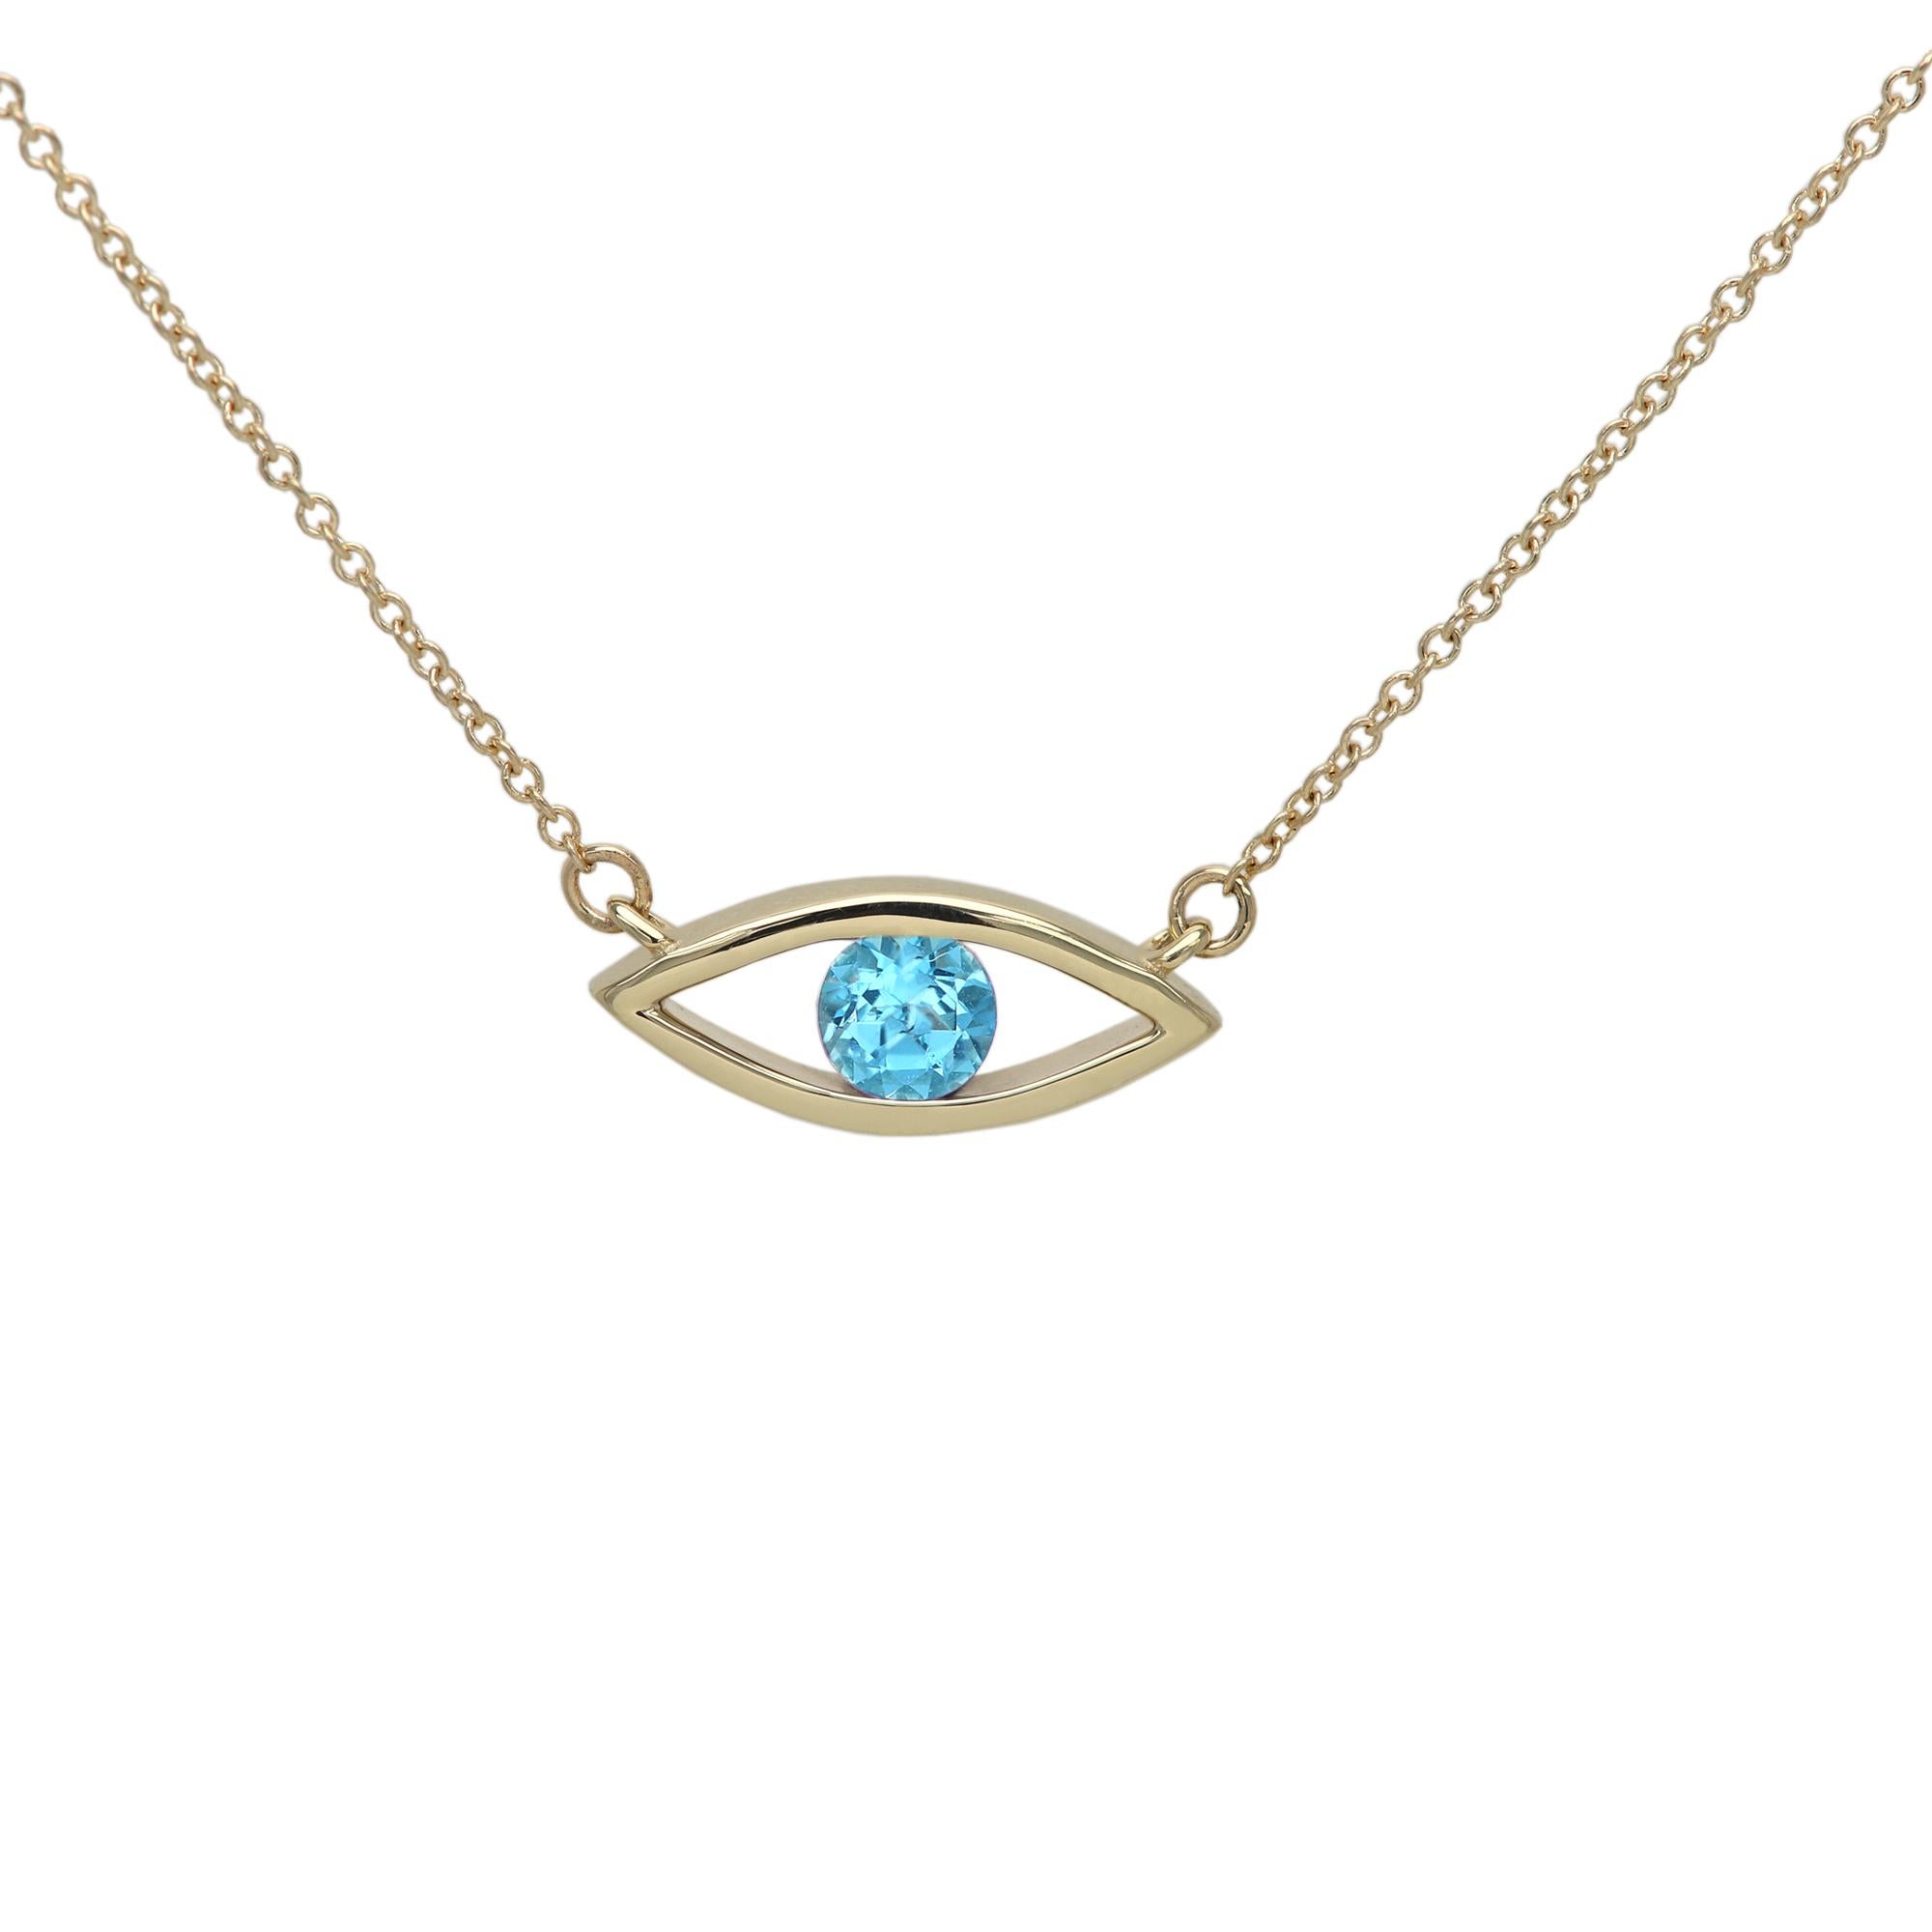 New, Very Elegant & Lovely, Evil Eye Birthstone Necklace Solid 14k Yellow Gold with Natural Blue Topaz gemstone 
Set in Yellow Gold Evil Eye - Good Luck & protection Necklace
Classic Cable Chain and Lobster Lock - all 14k, 
Chain Length - as your